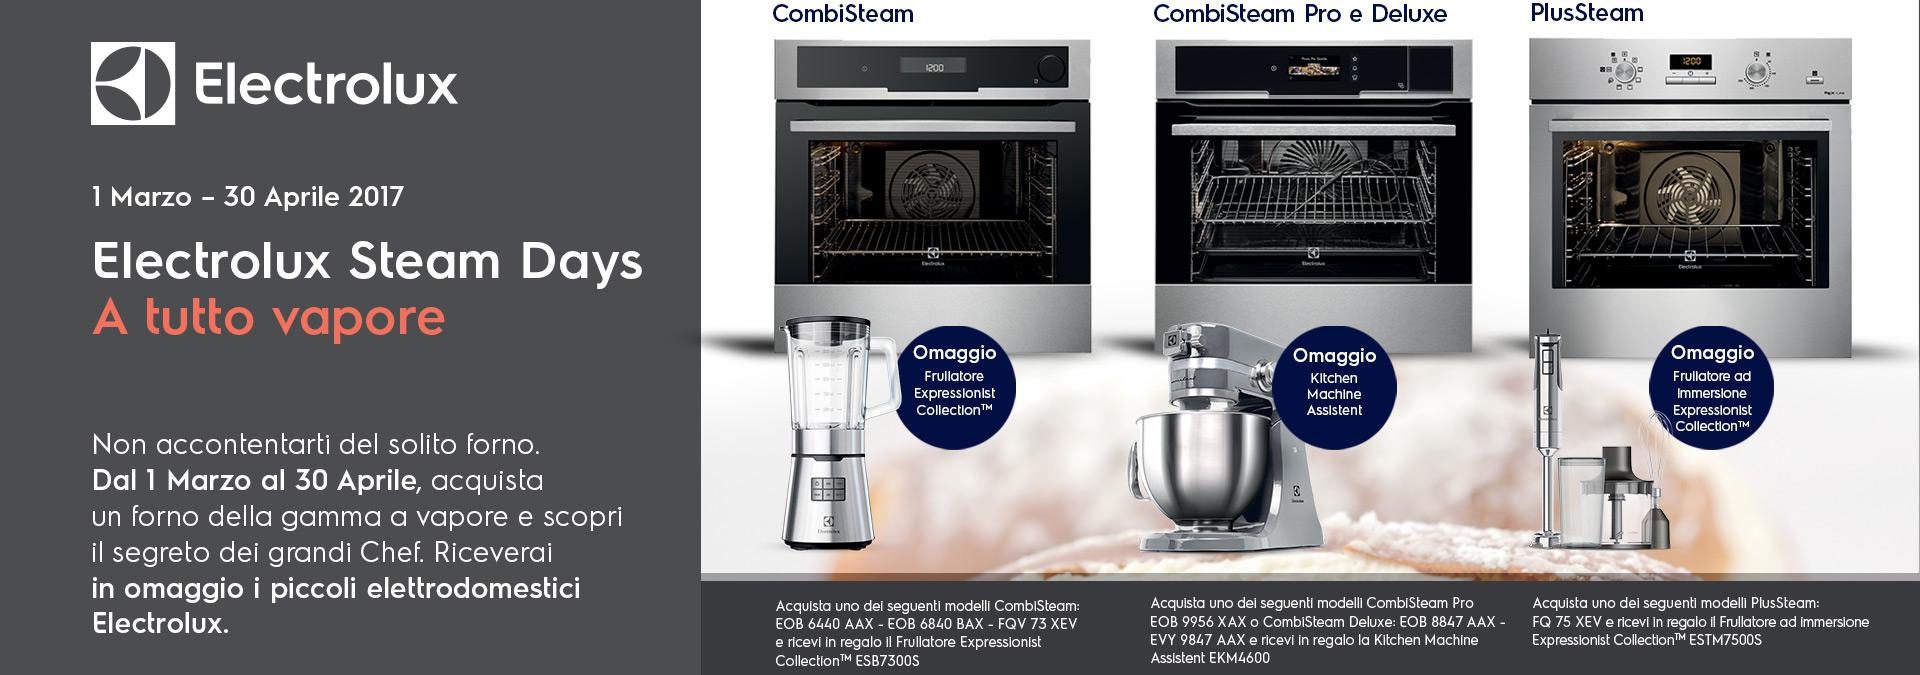 ELECTROLUX STEAM DAYS A TUTTO VAPORE